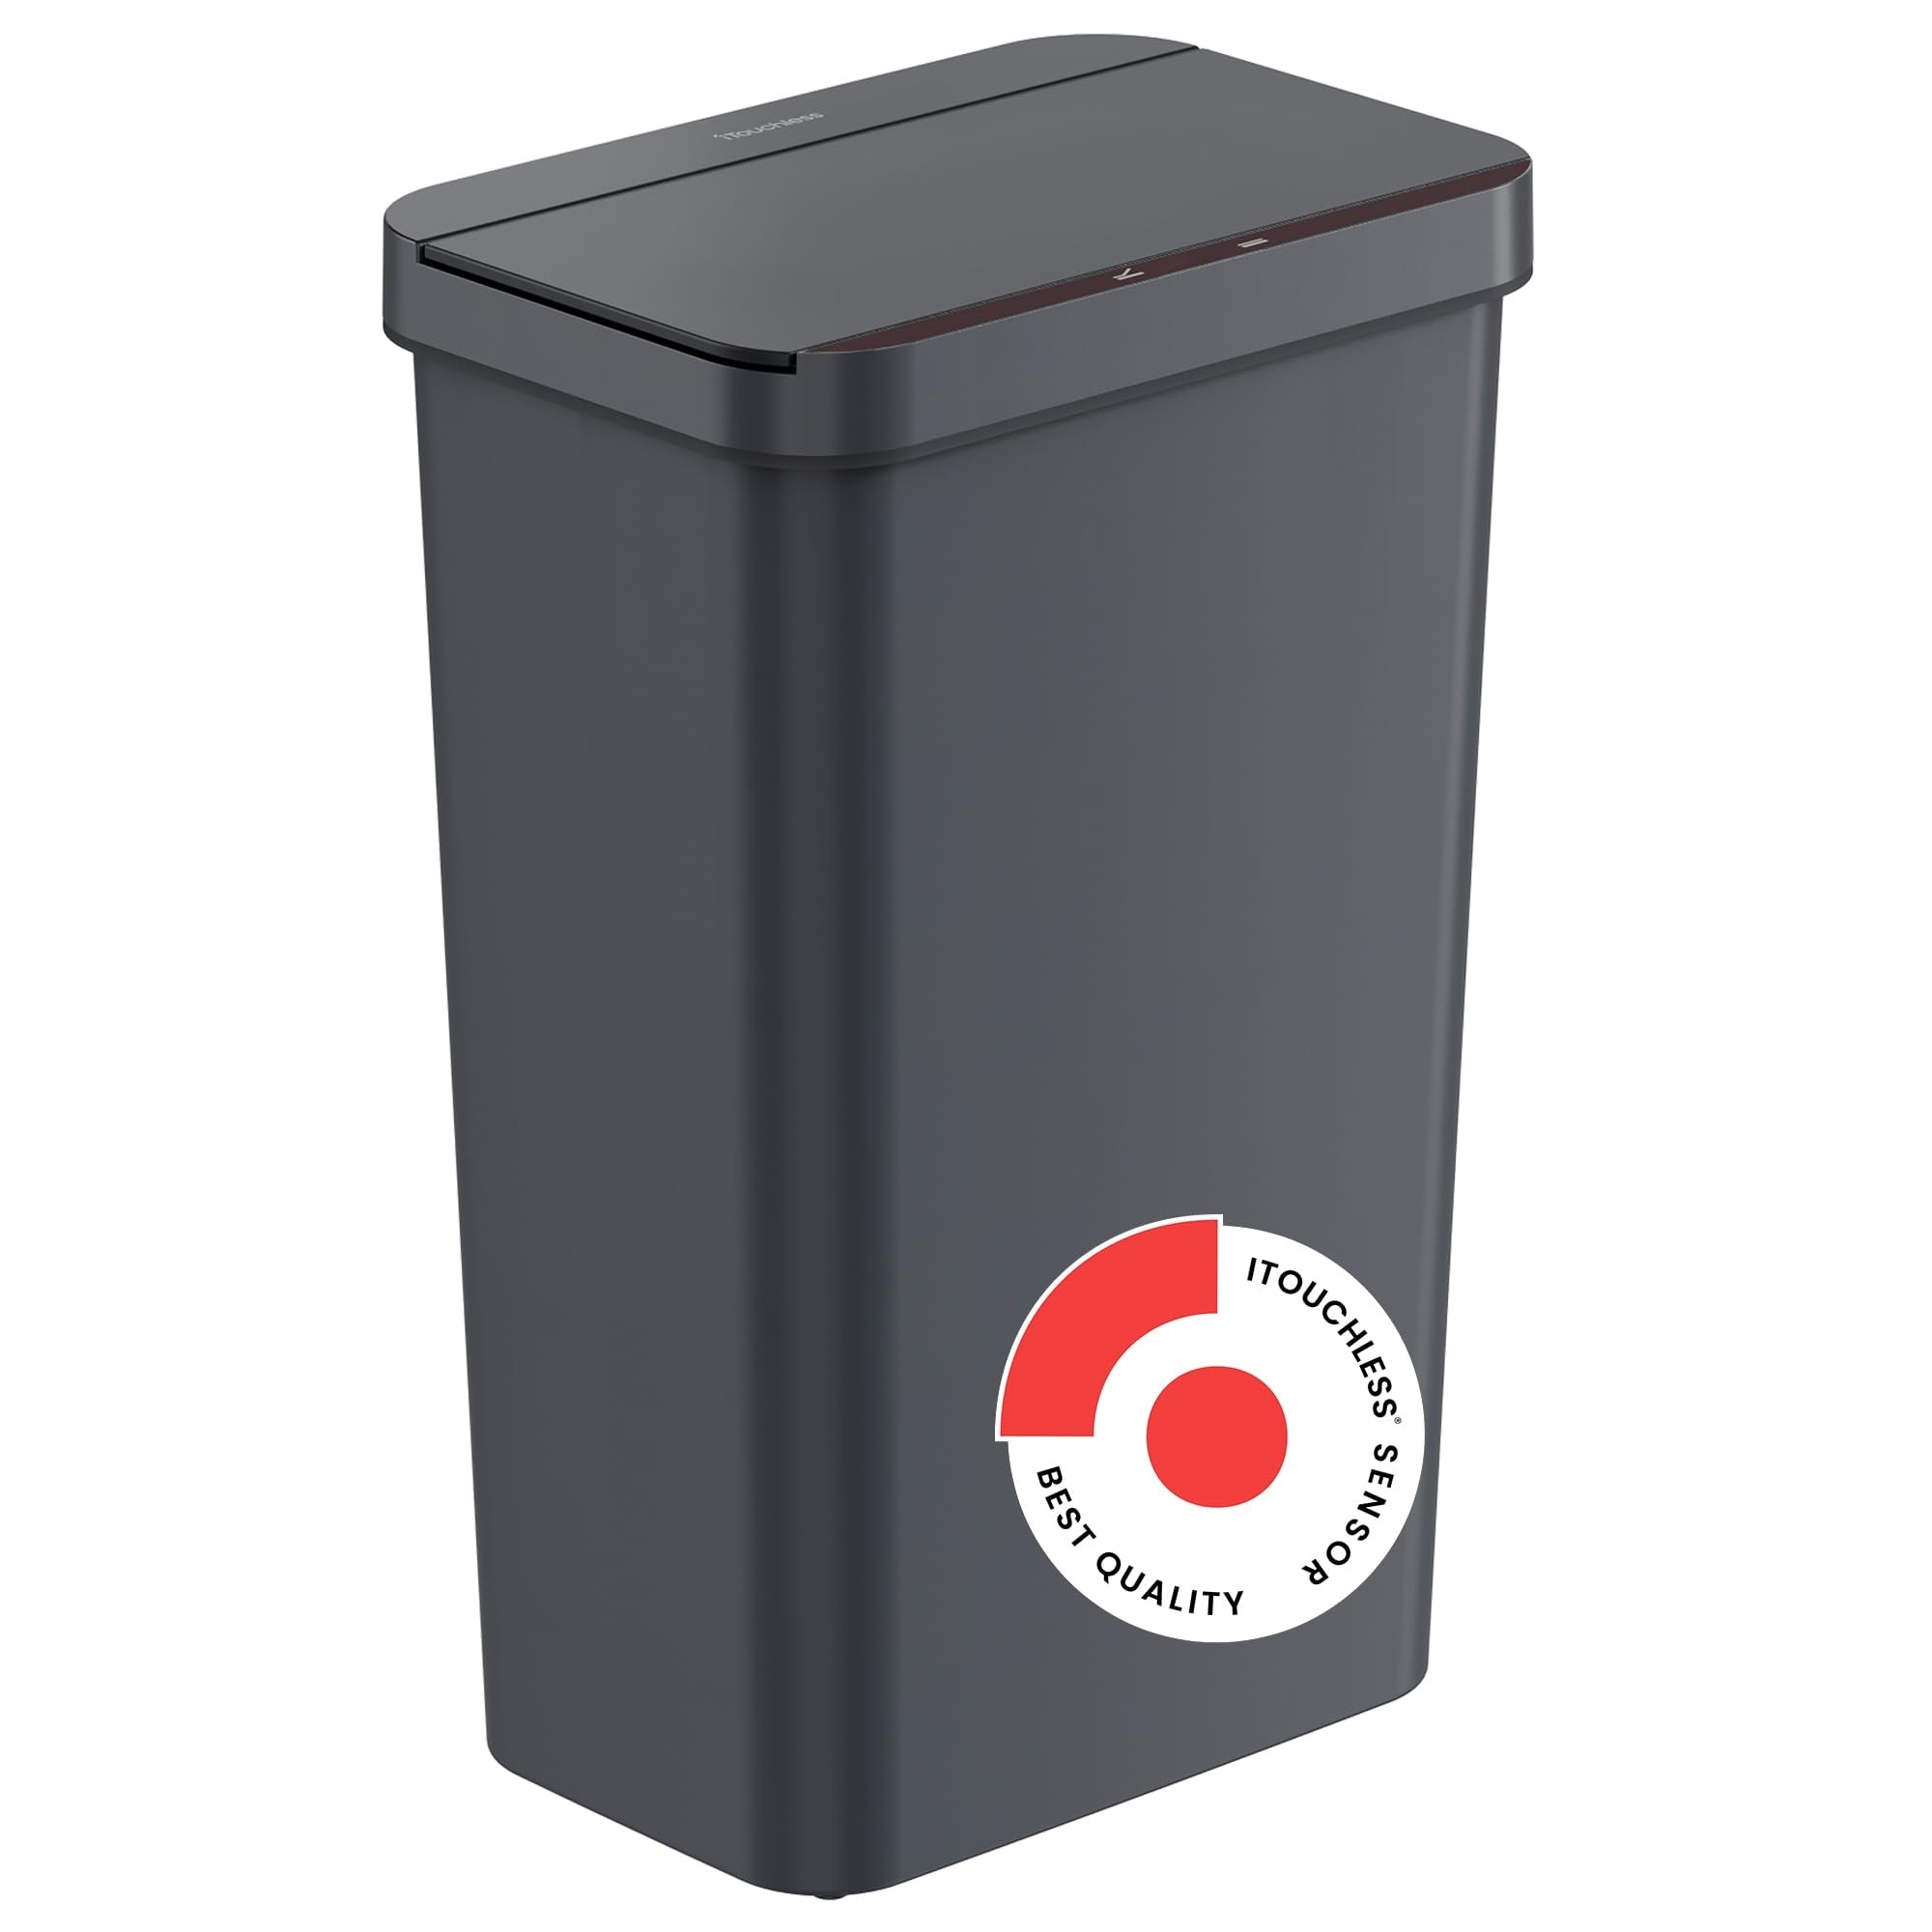 https://ak1.ostkcdn.com/images/products/is/images/direct/47ffa9a846528396d4a4232fc20d97d6810278f3/13.2-Gallon-Plastic-Sensor-Trash-Can%2C-Durable-Dent-Proof-Construction%2C-Slim-and-Space-Saving-Automatic-Bin%C2%A0-for-Home%2C-Office.jpg